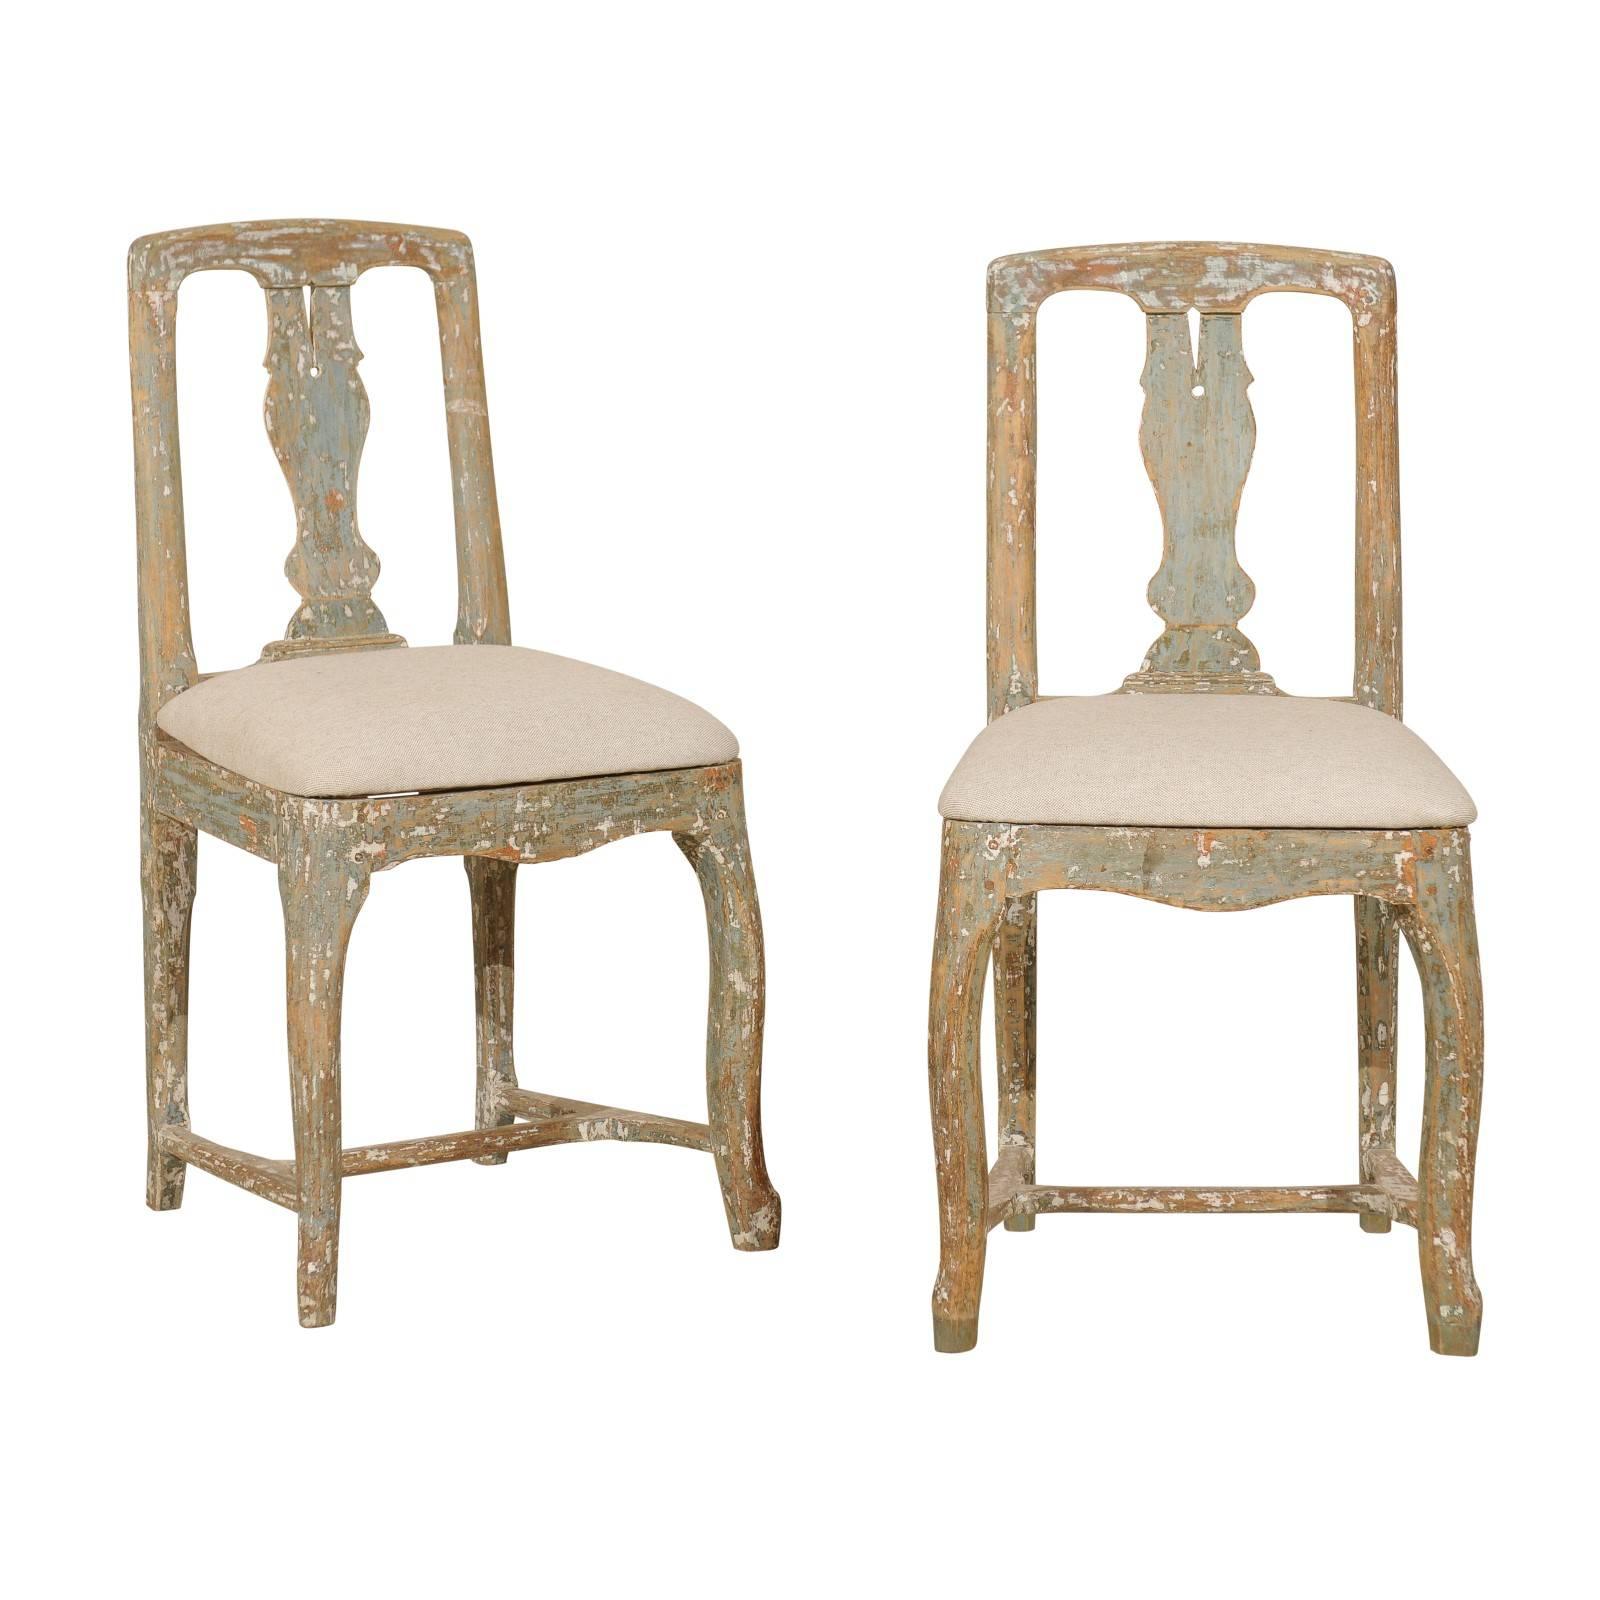 Pair of Swedish Period Rococo Side Chairs in Soft Green, Beige and White Color